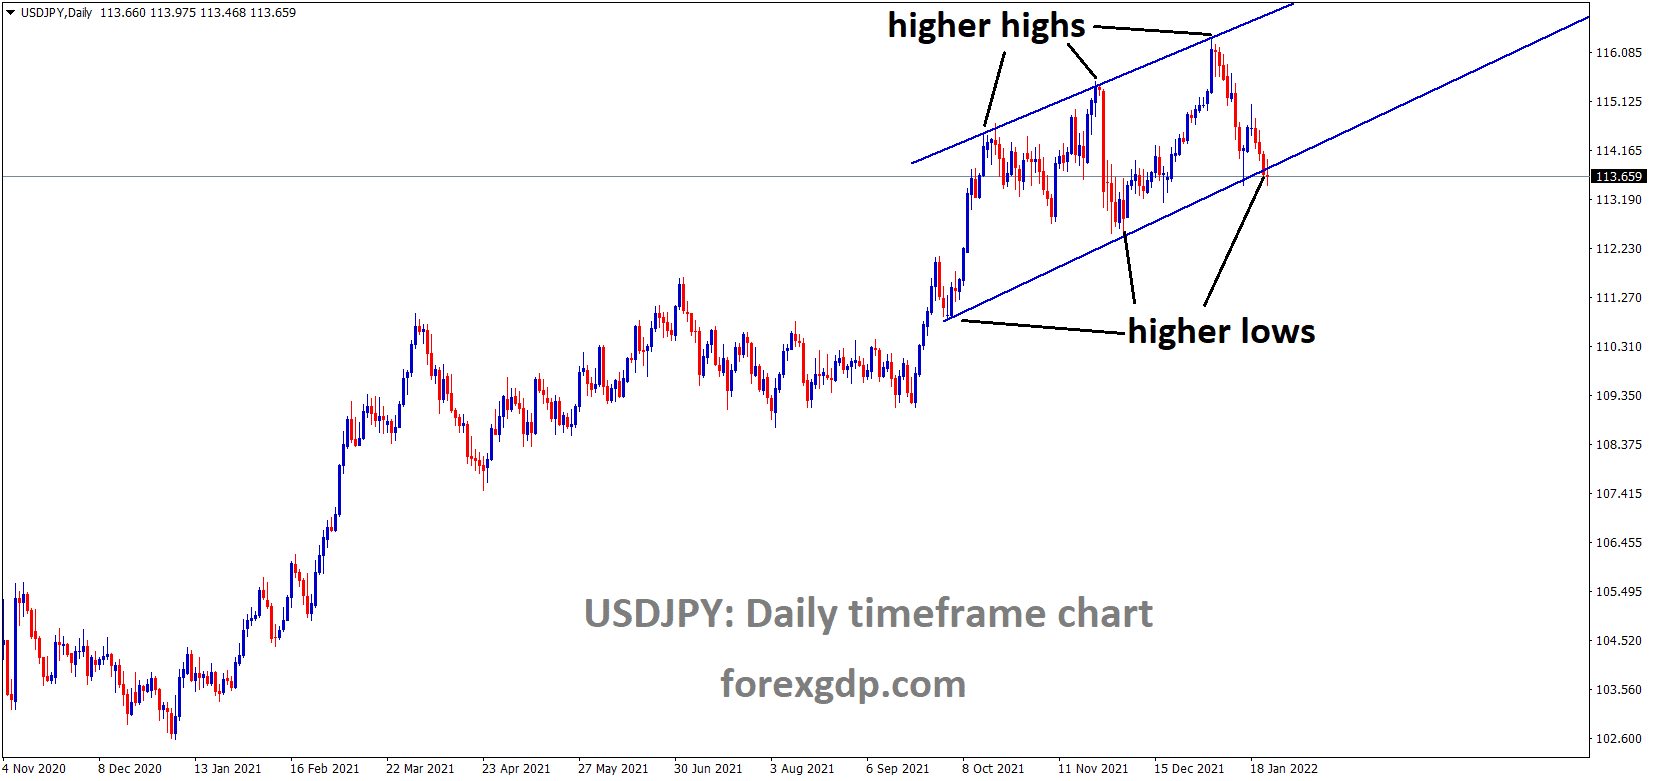 USDJPY is moving in an Ascending channel and the market has reached the higher low area of the channel 1